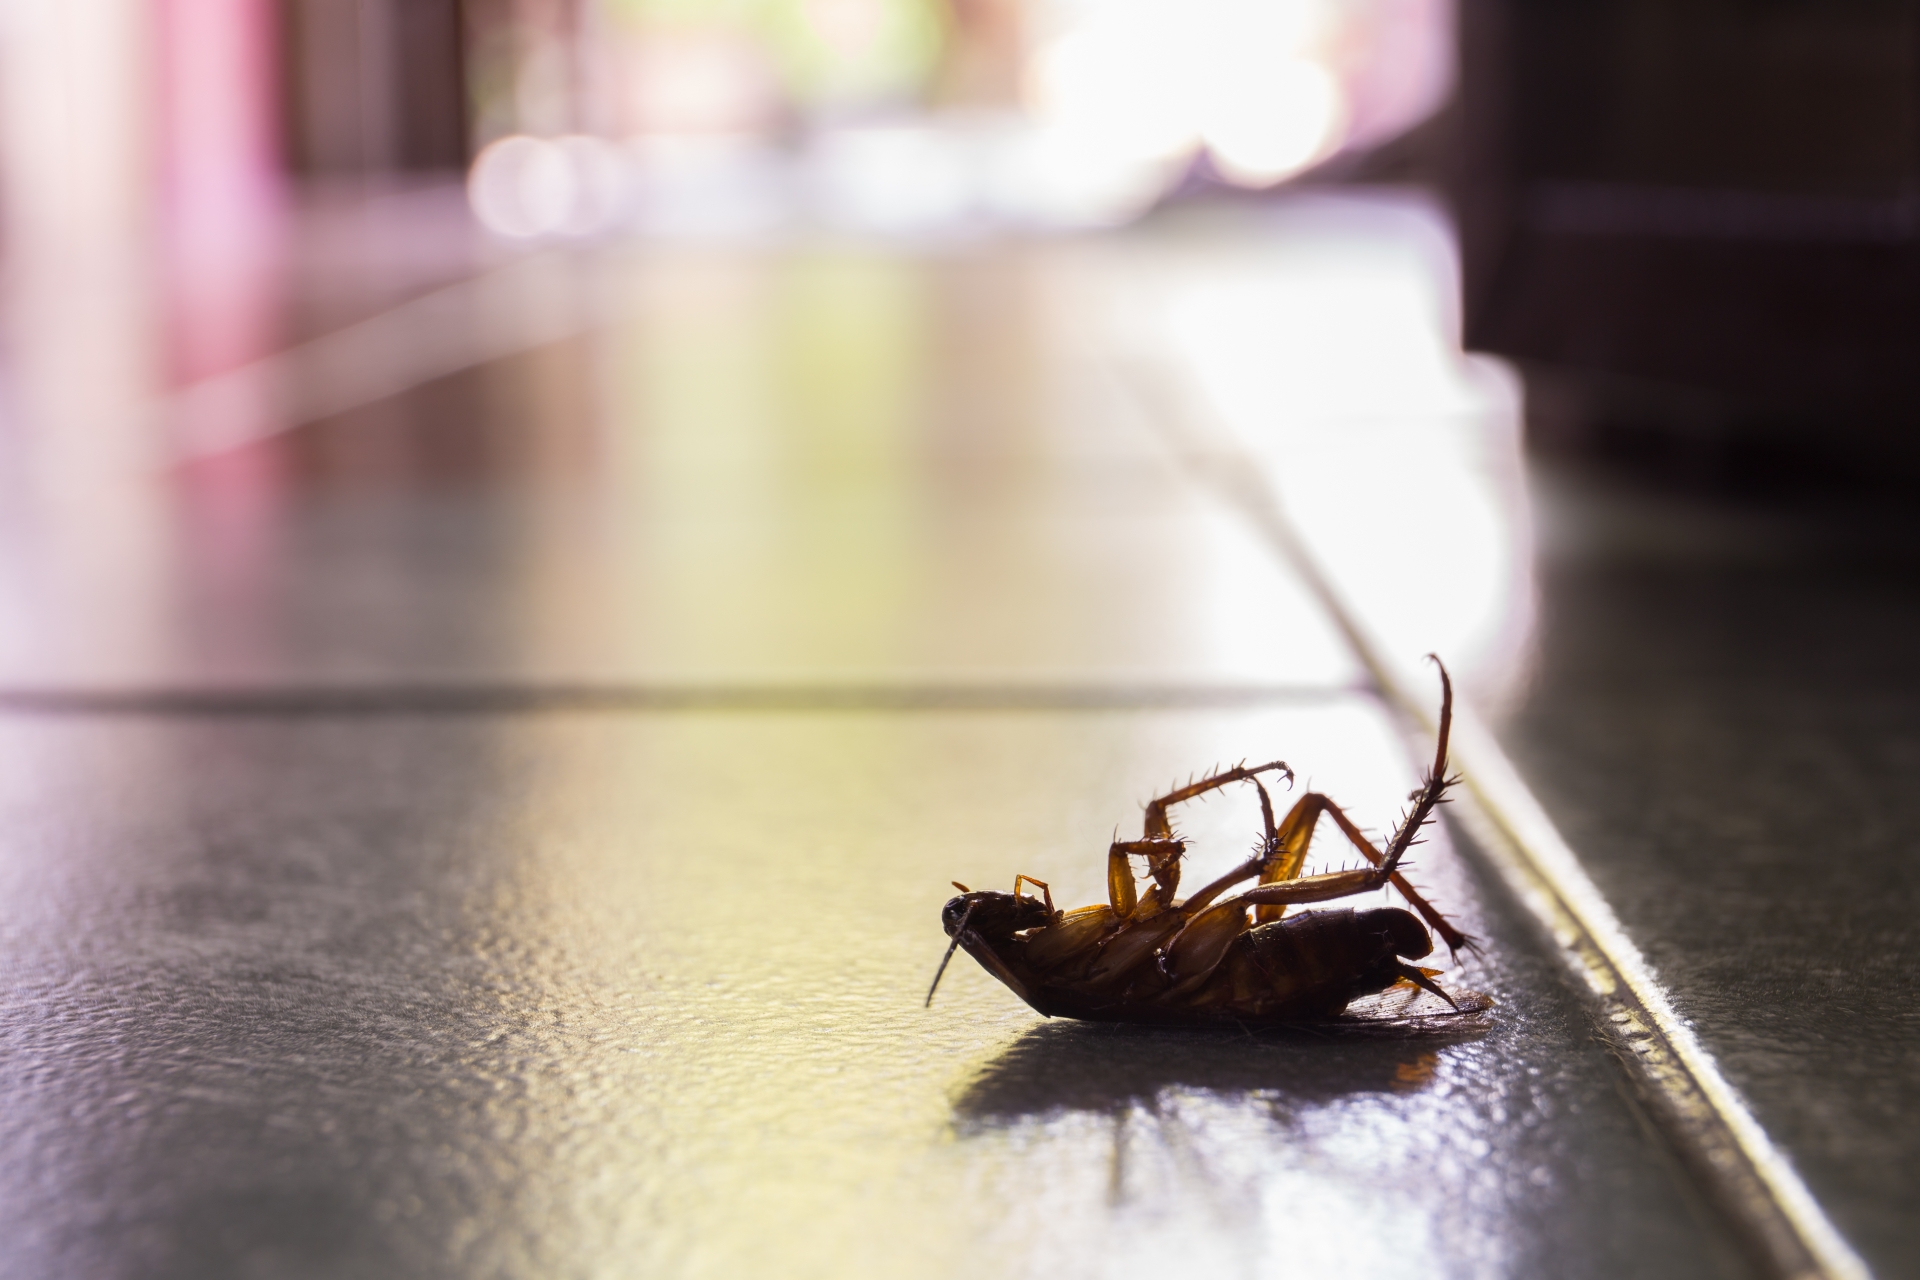 Cockroach Control, Pest Control in Pinner, Eastcote, Hatch End, HA5. Call Now 020 8166 9746